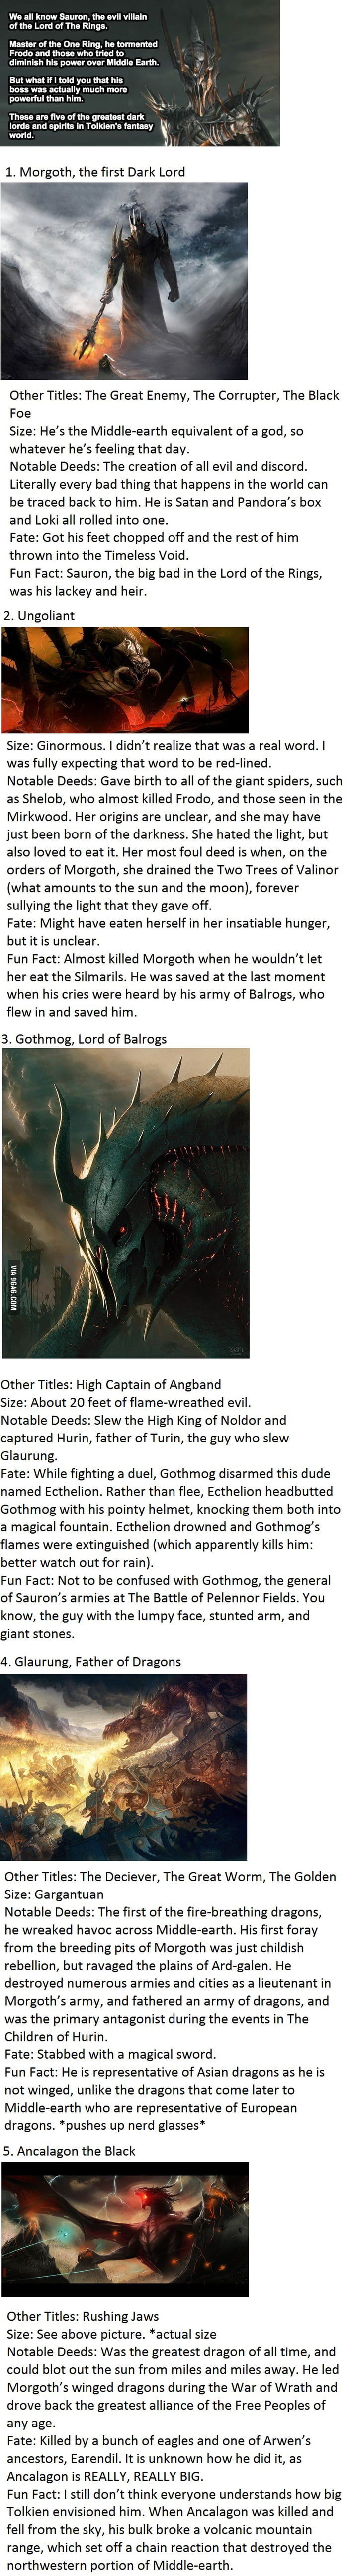 Dragons of Middle Earth - 9GAG